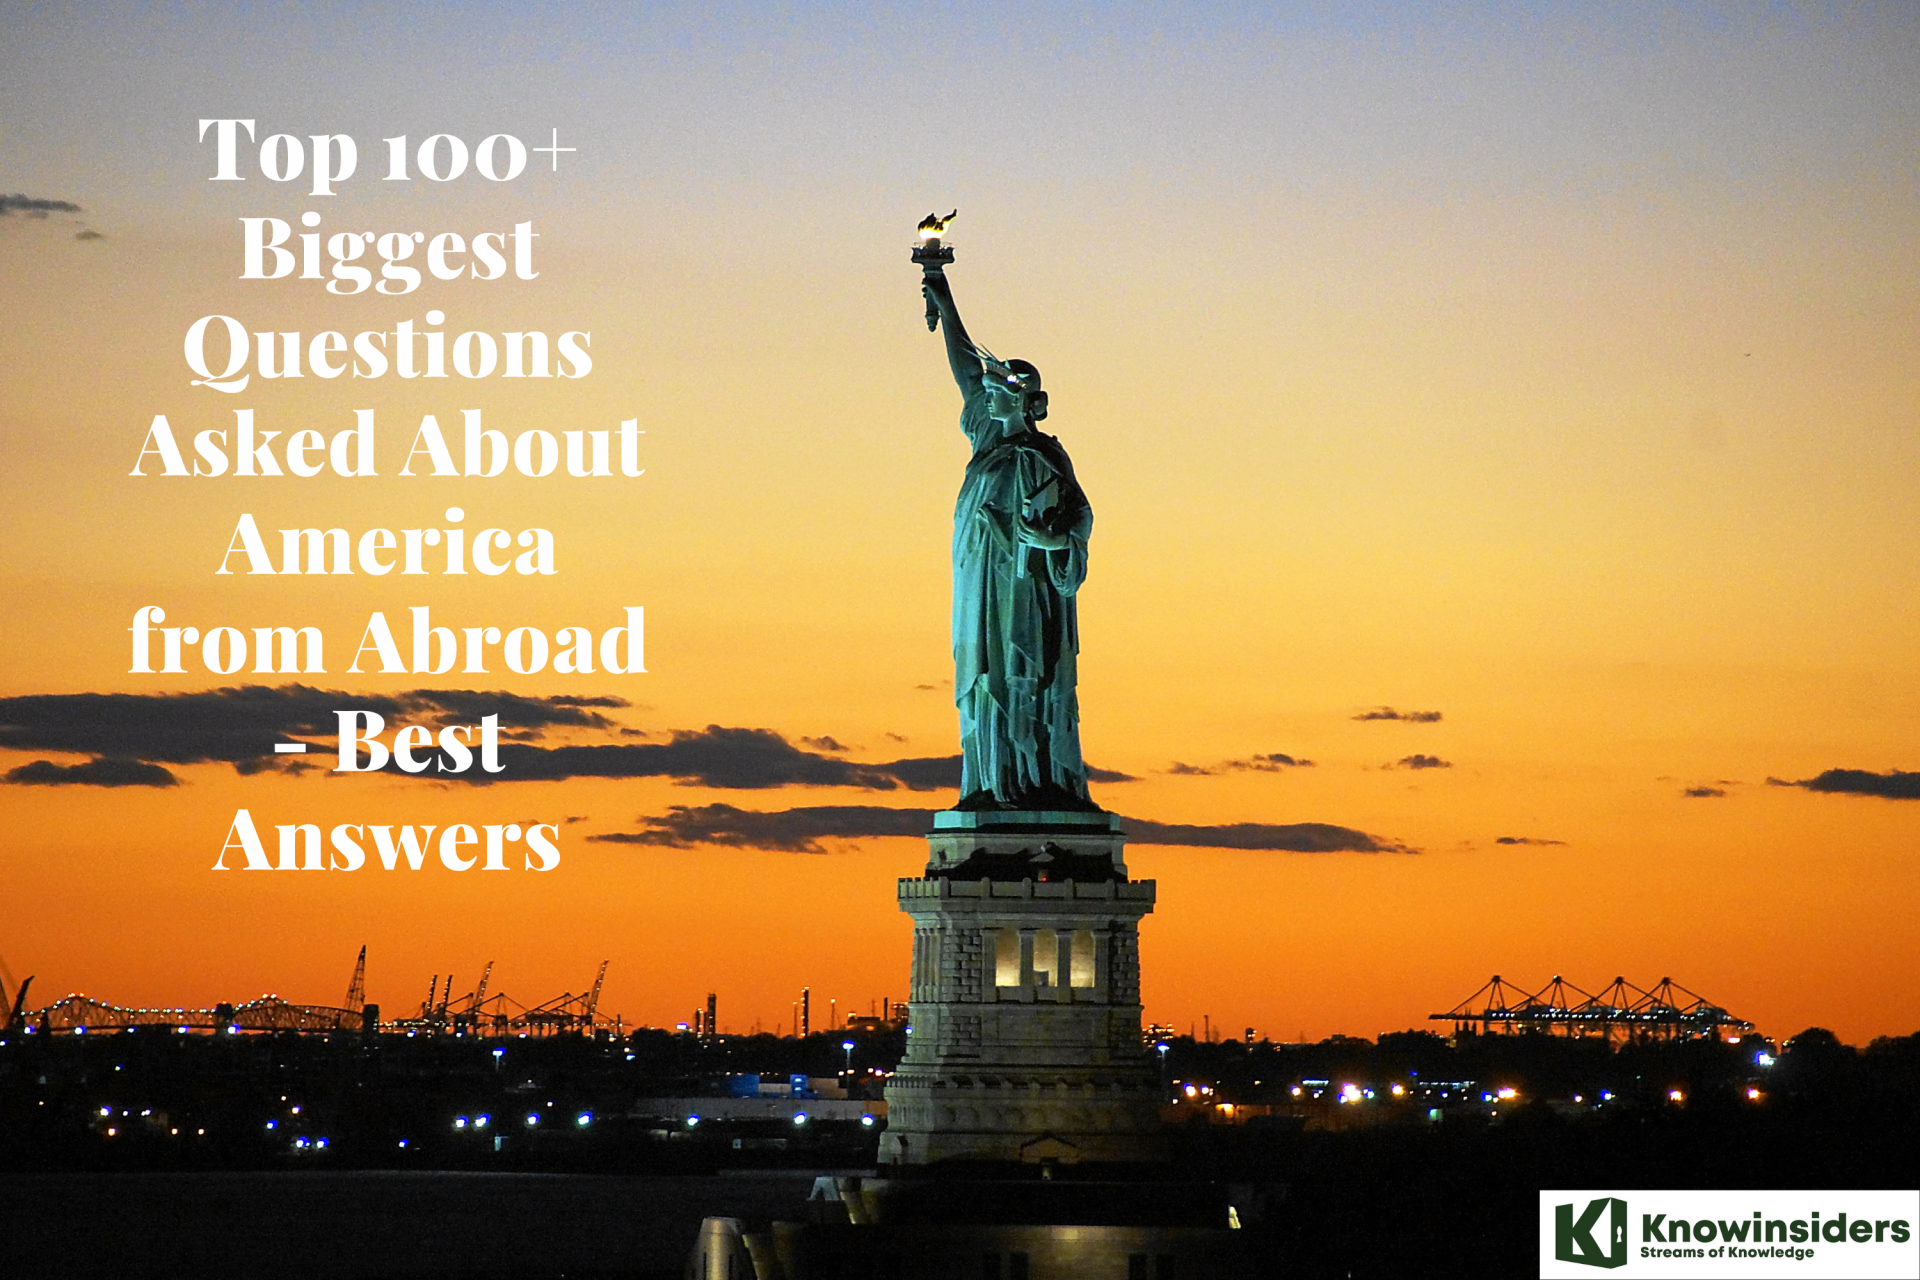 Top 100+ Biggest Questions Asked About America from Abroad and Best Answers